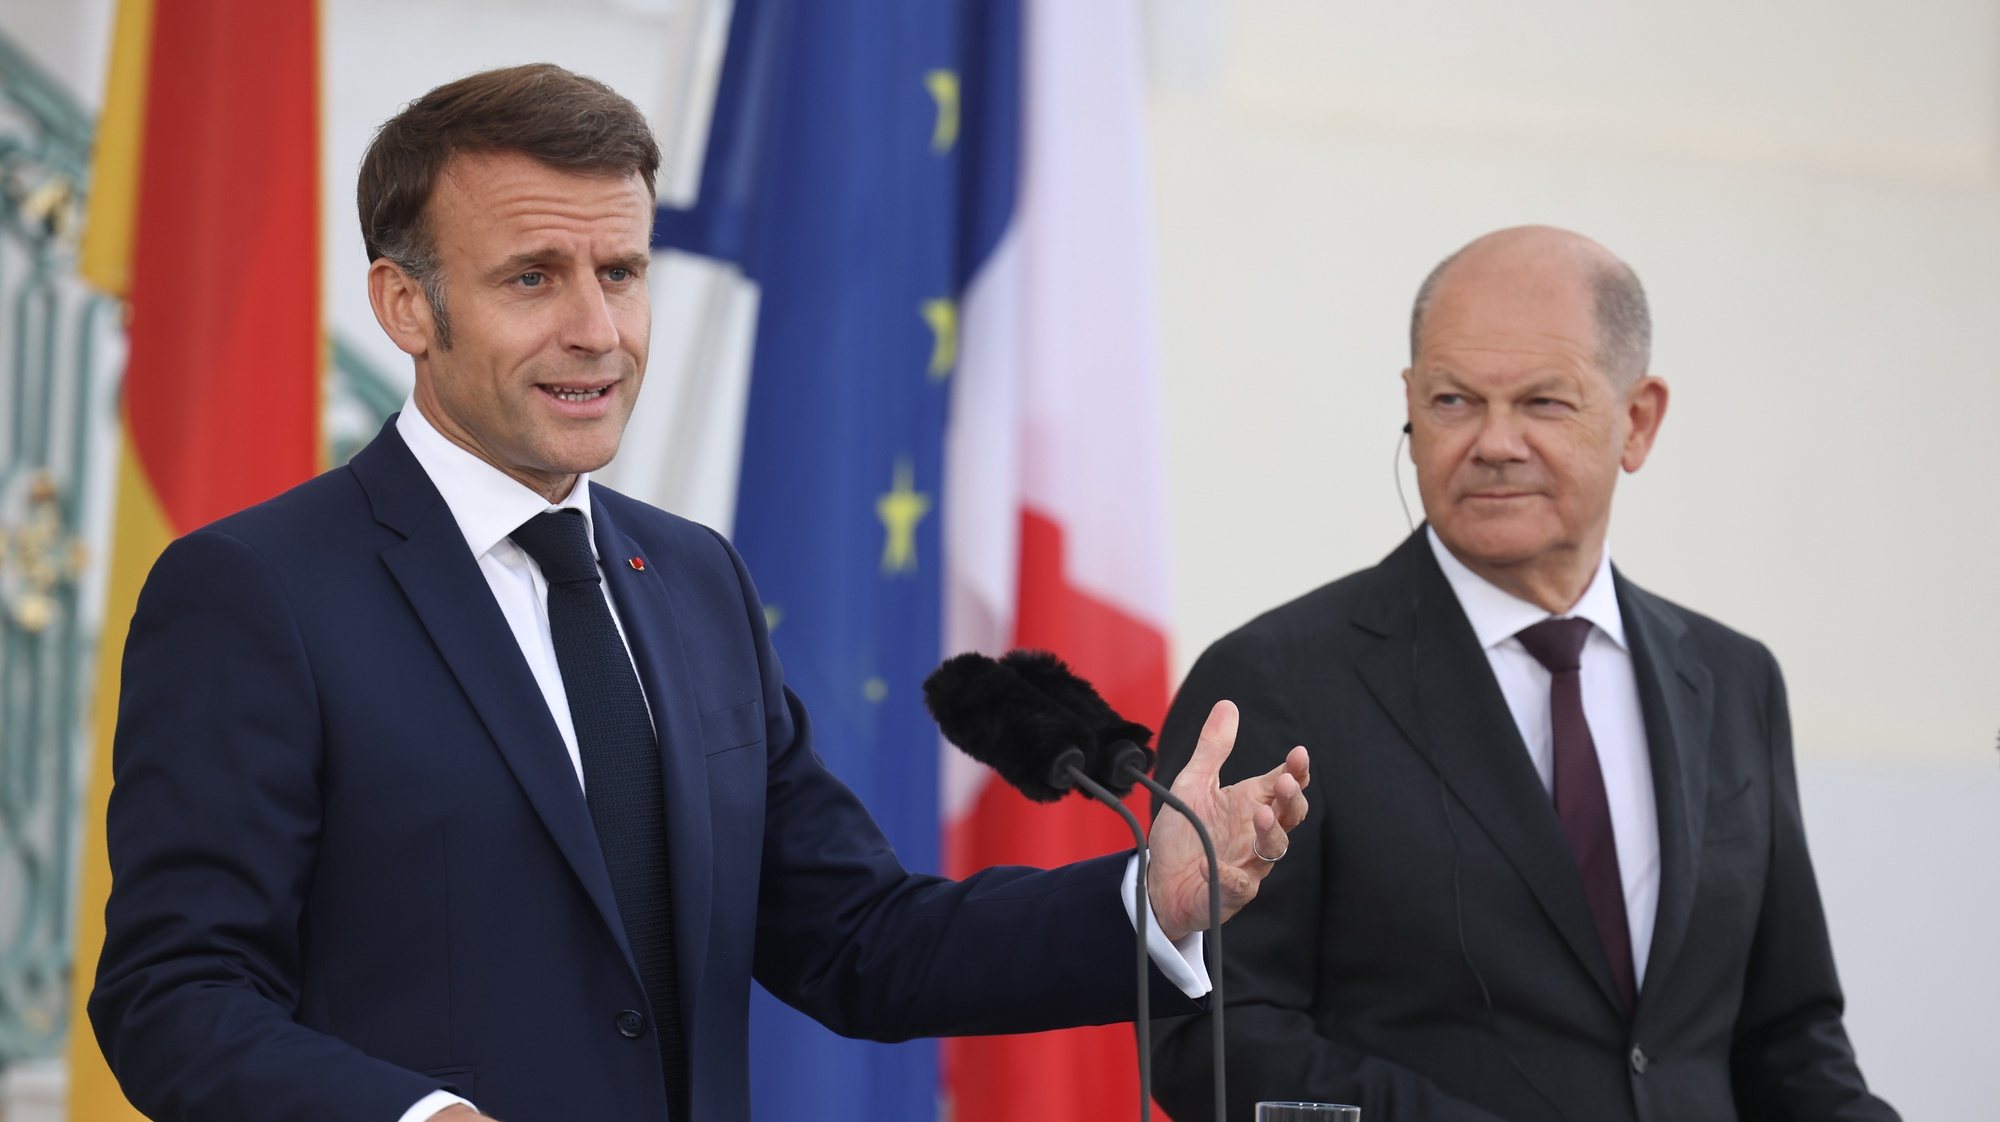 epa11375932 French President Emmanuel Macron (L) gestures next to German Chancellor Olaf Scholz during a joint press conference at Meseberg Palace in Meseberg near Gransee, Germany, 28 May 2024. French President Emmanuel Macron visits Germany from 26 to 28 May. After appointments with Federal President Steinmeier in German regions Berlin, Dresden and Muenster, Macron meets German Chancellor Olaf Scholz at Meseberg Palace on 28 May 2024 for a Franco-German Council of Ministers.  EPA/CLEMENS BILAN